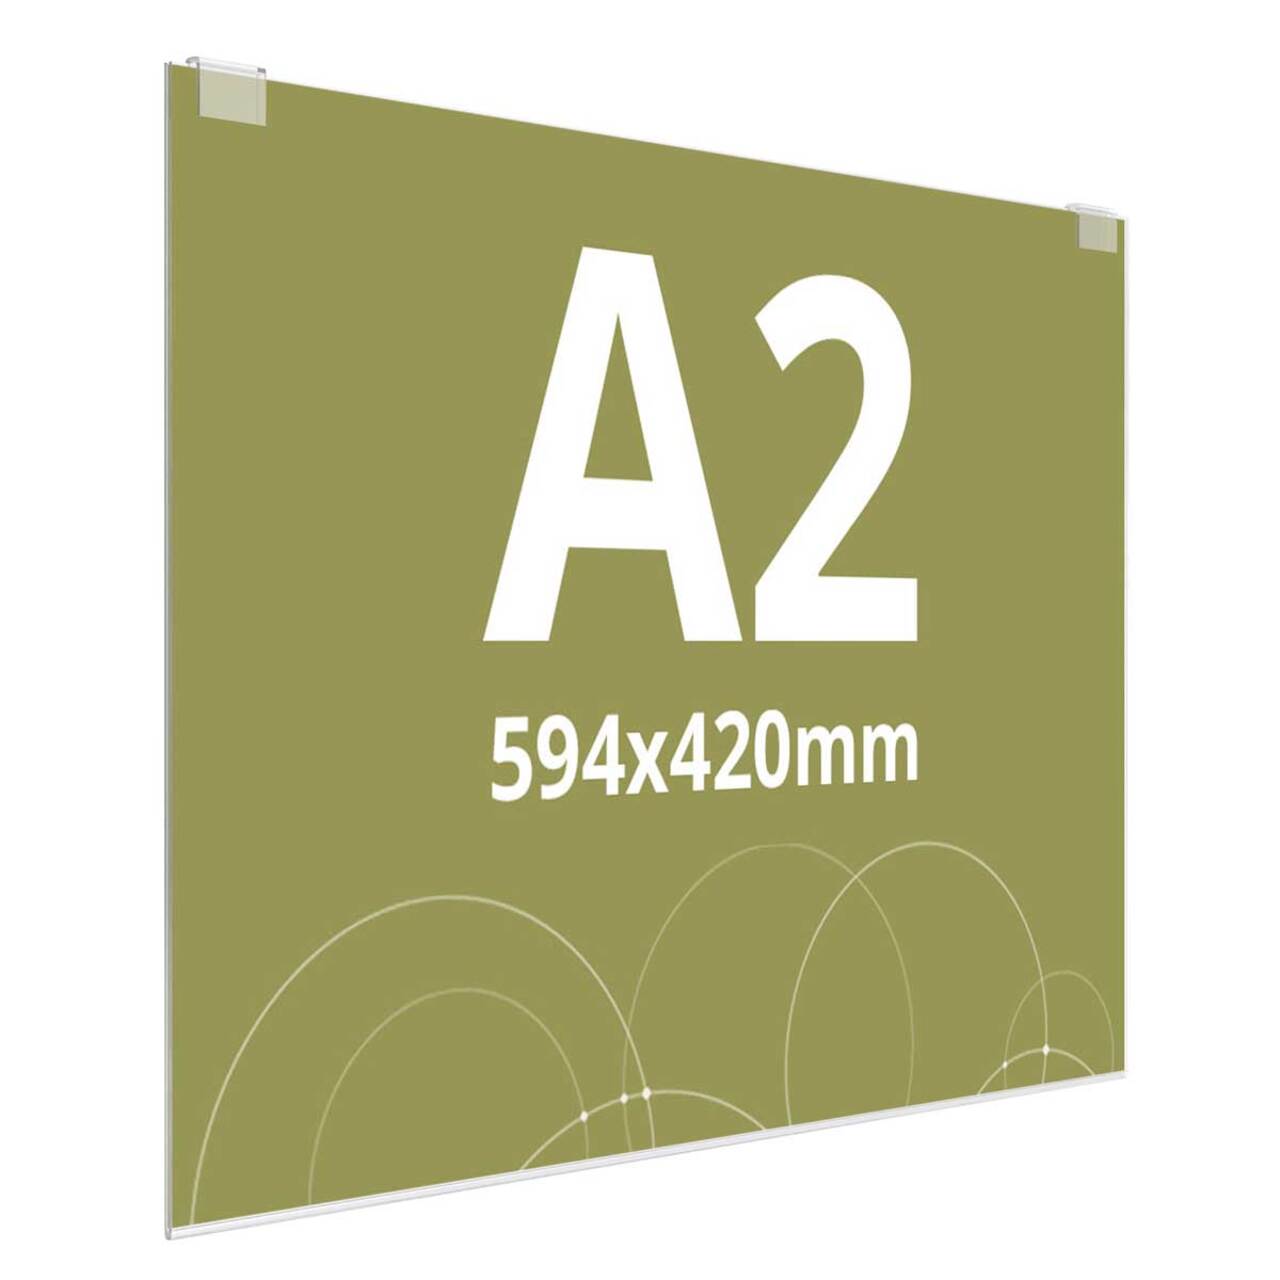 Acrylic Poster Support A2, JJ DISPLAYS, 420 x 594 mm, Landscape